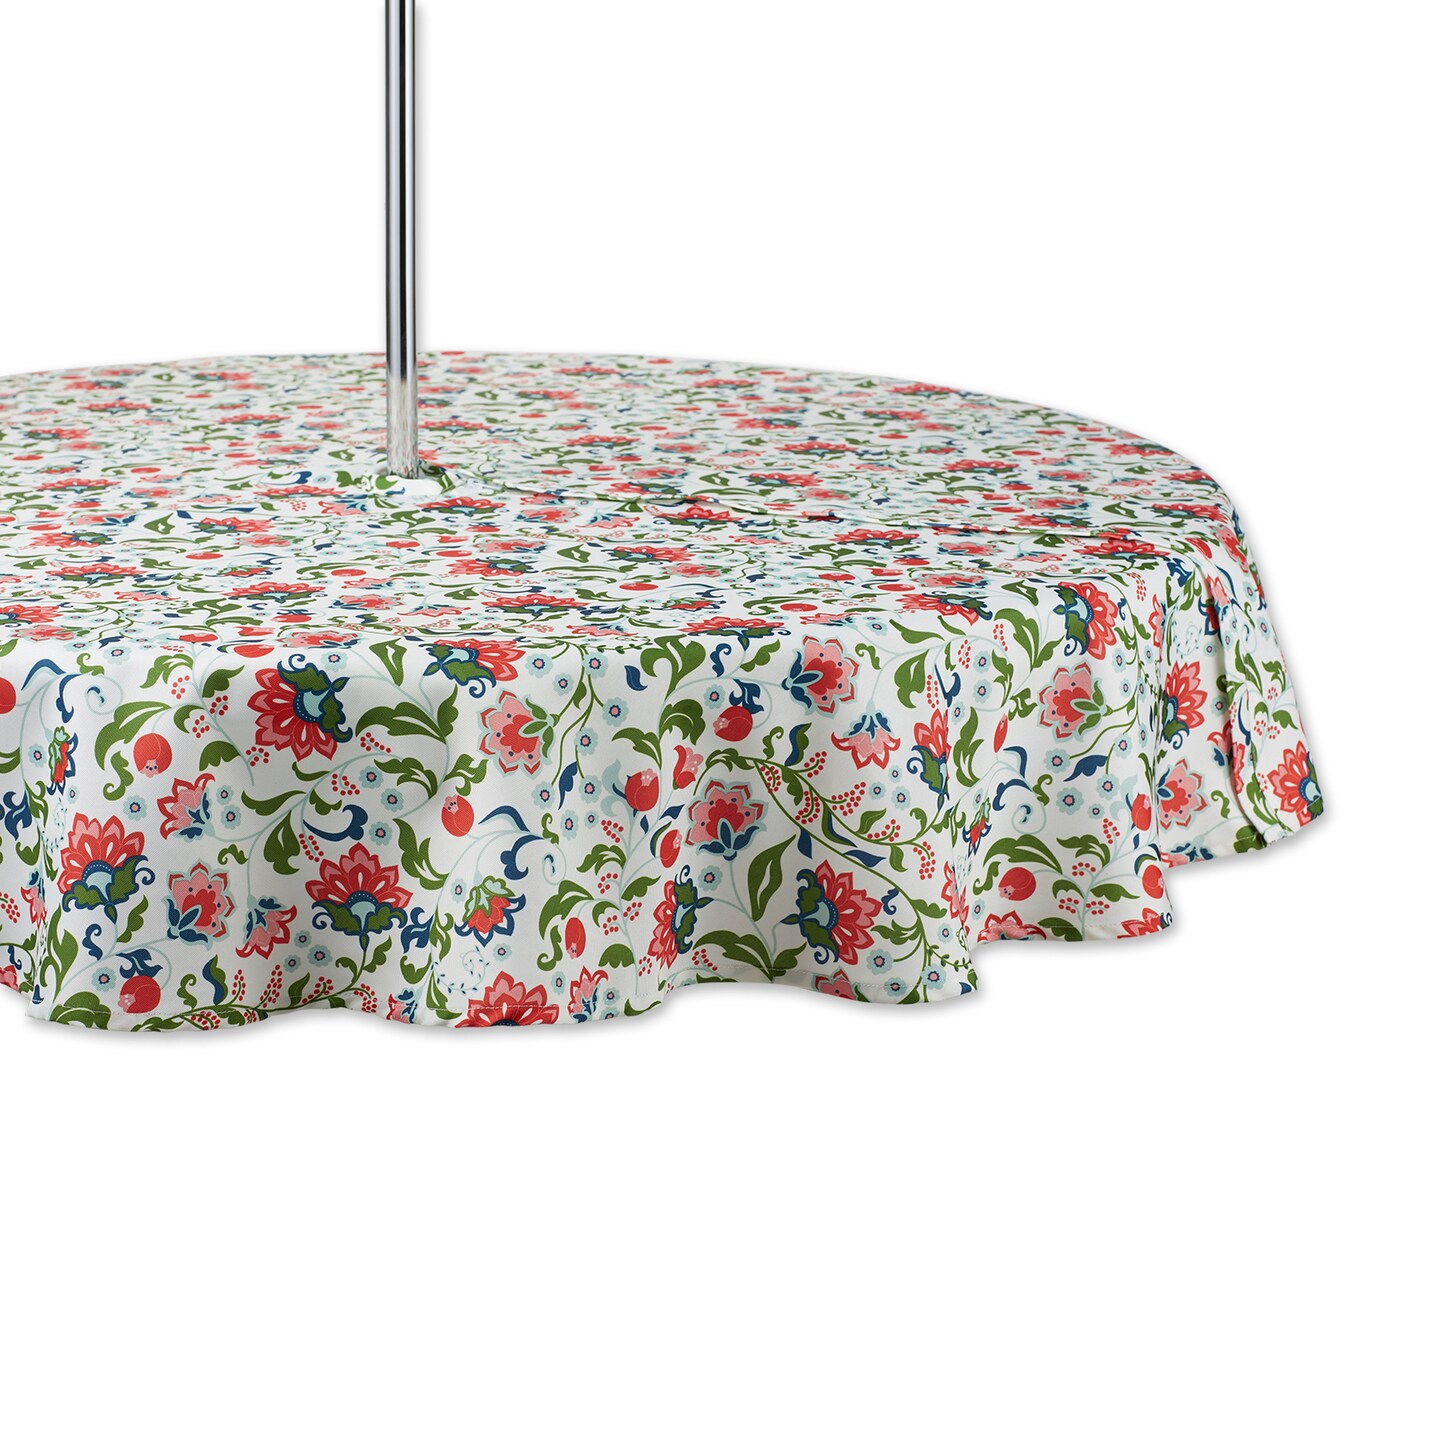 DII Garden Floral Print Outdoor Tablecloth With Zipper 60 Round